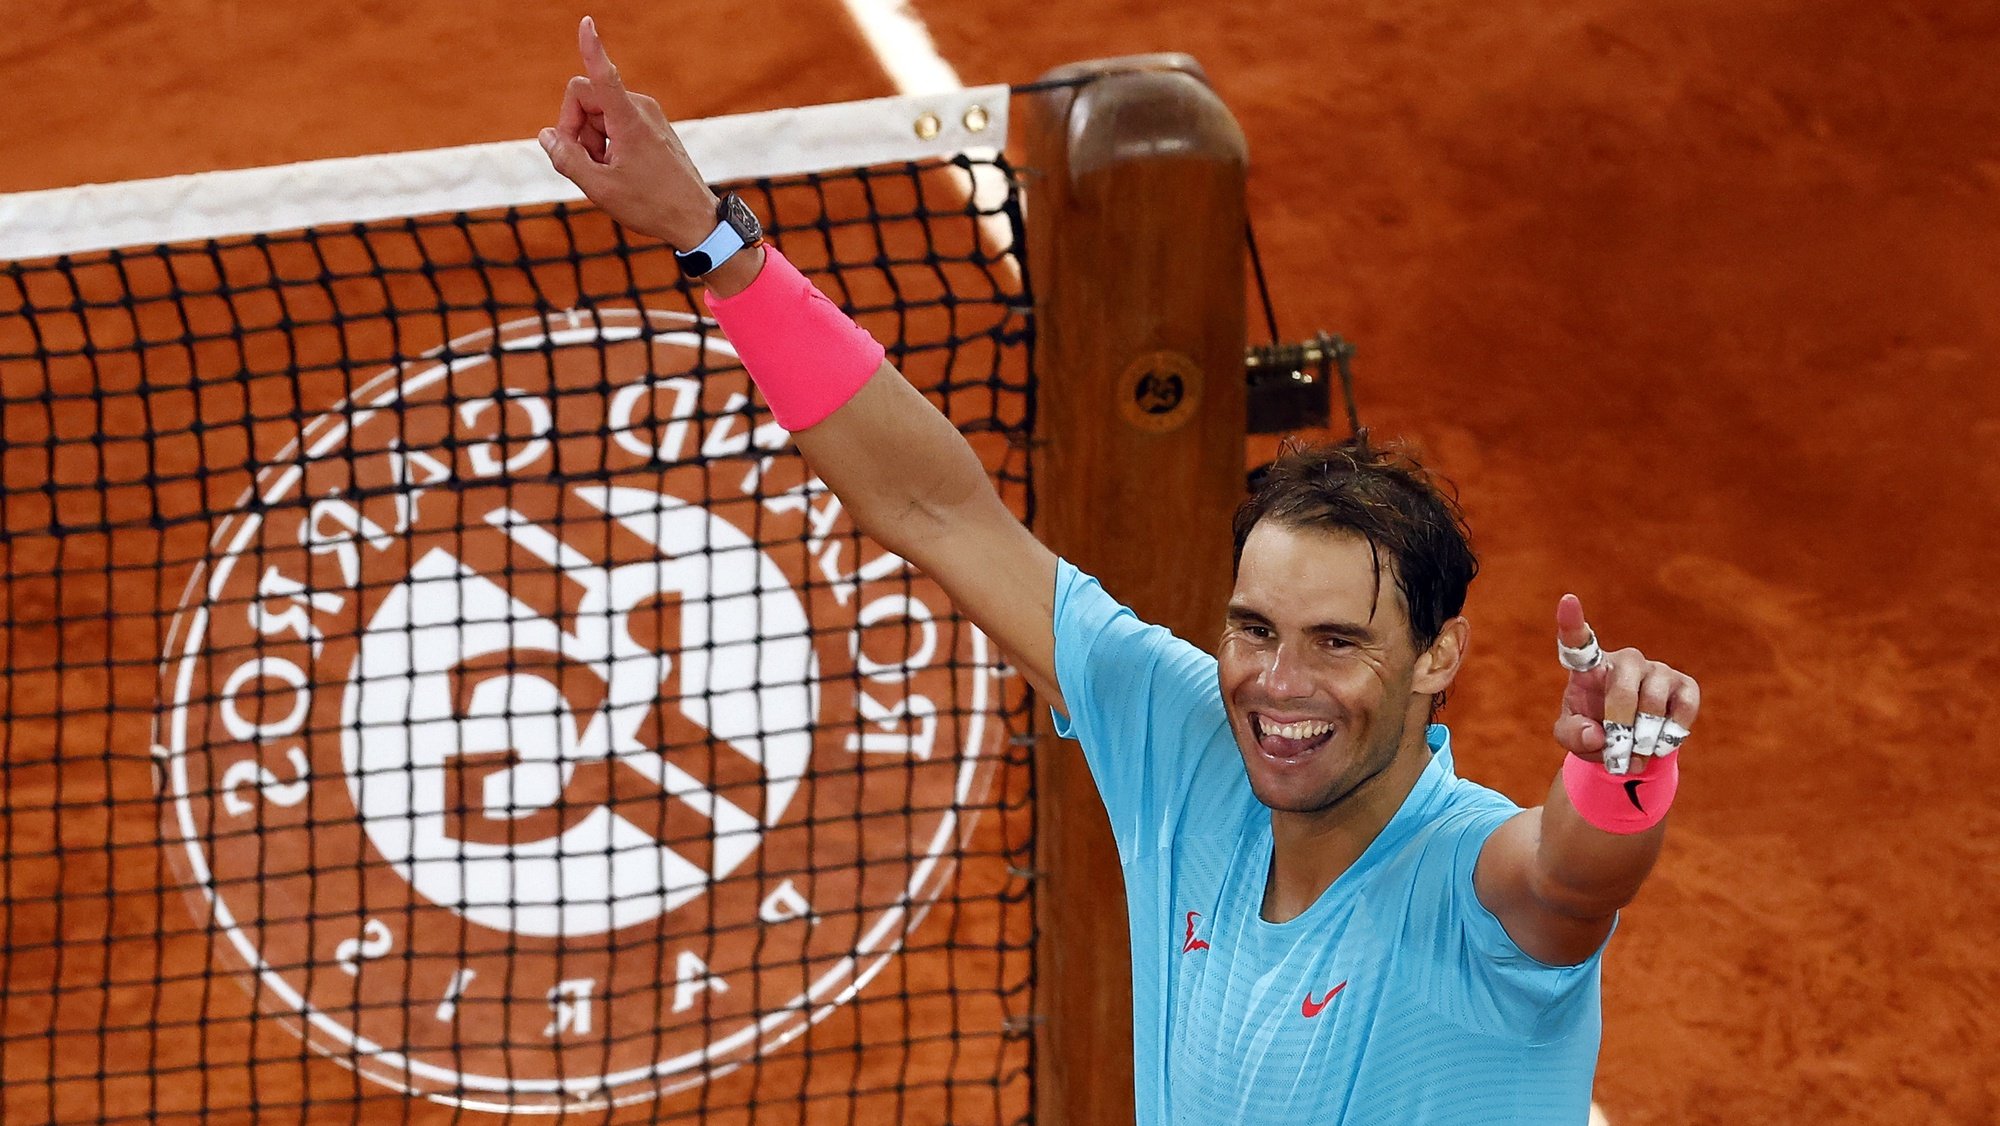 epa08736144 Rafael Nadal of Spain reacts after winning against Novak Djokovic of Serbia in their men’s final match during the French Open tennis tournament at Roland ​Garros in Paris, France, 11 October 2020.  EPA/IAN LANGSDON